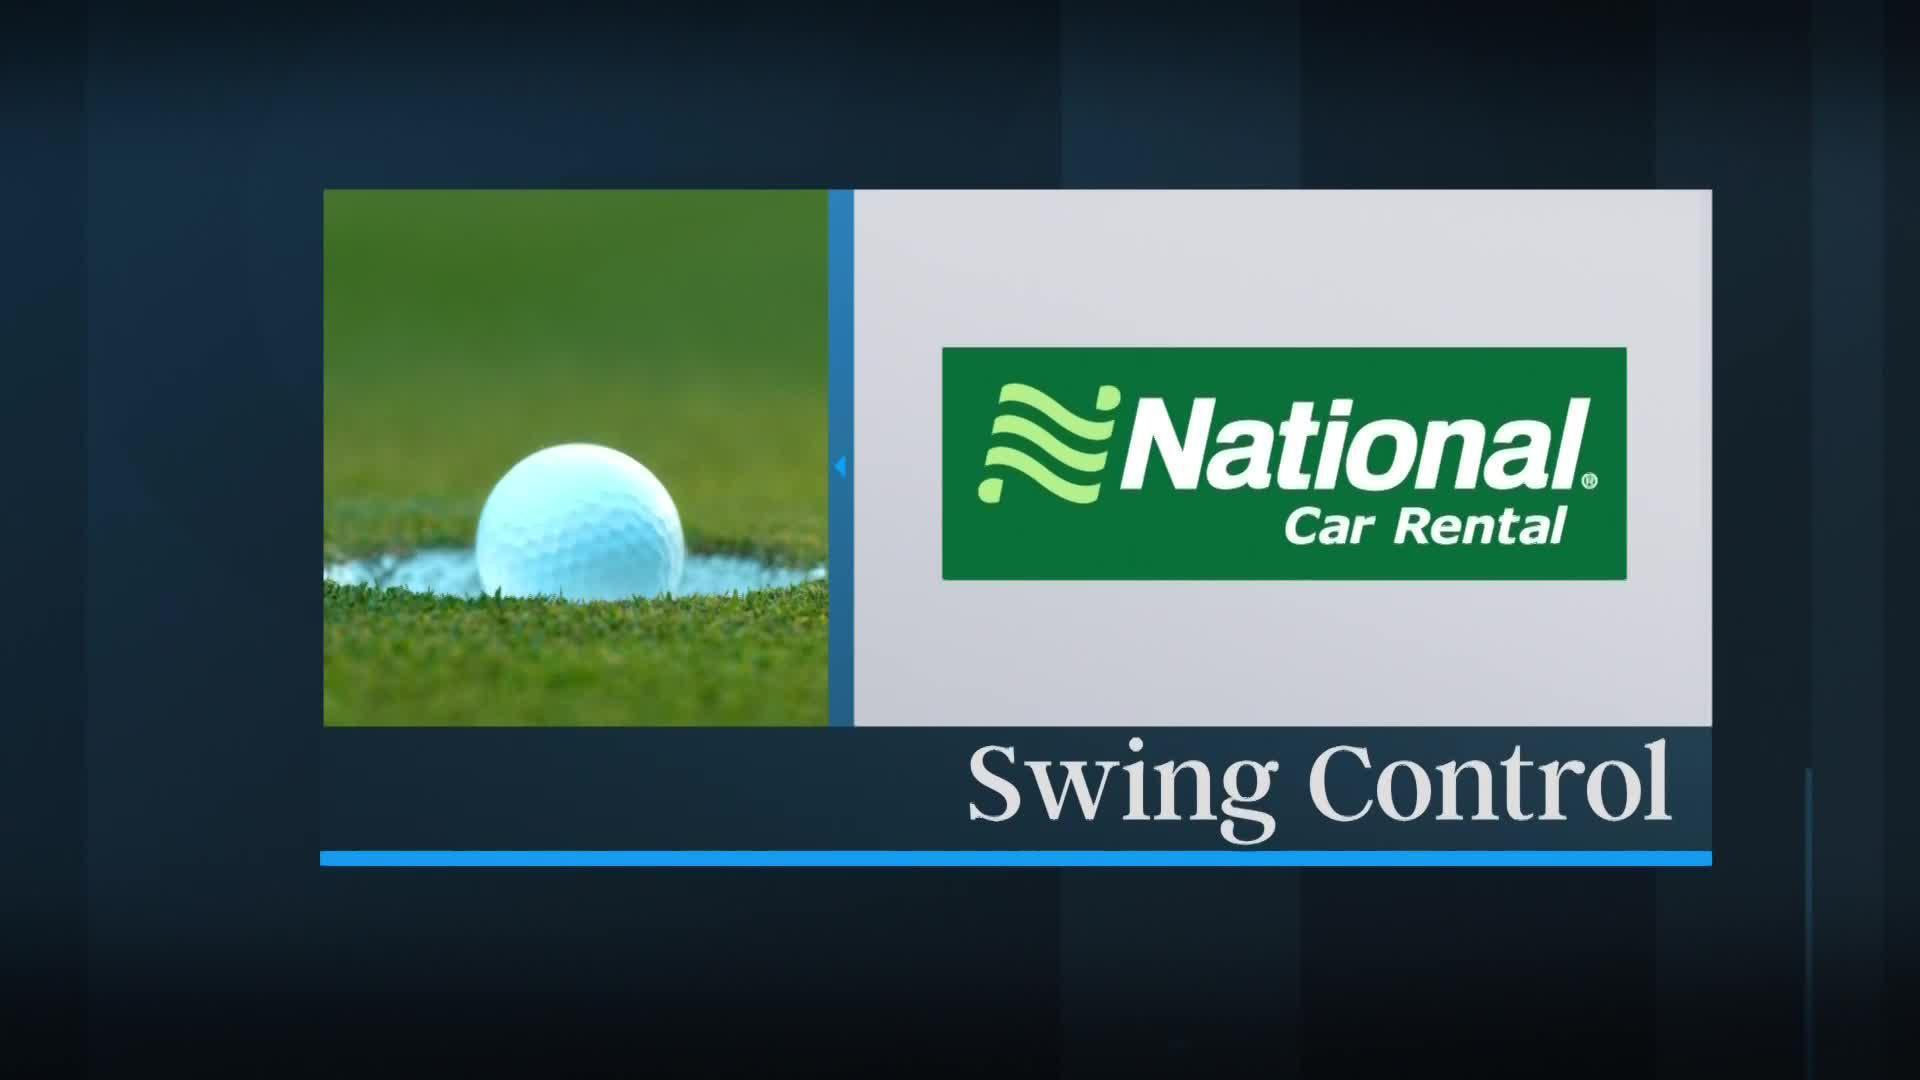 National Car Rental Swing Control - Round 2 Walmart NW Arkasnas Championship